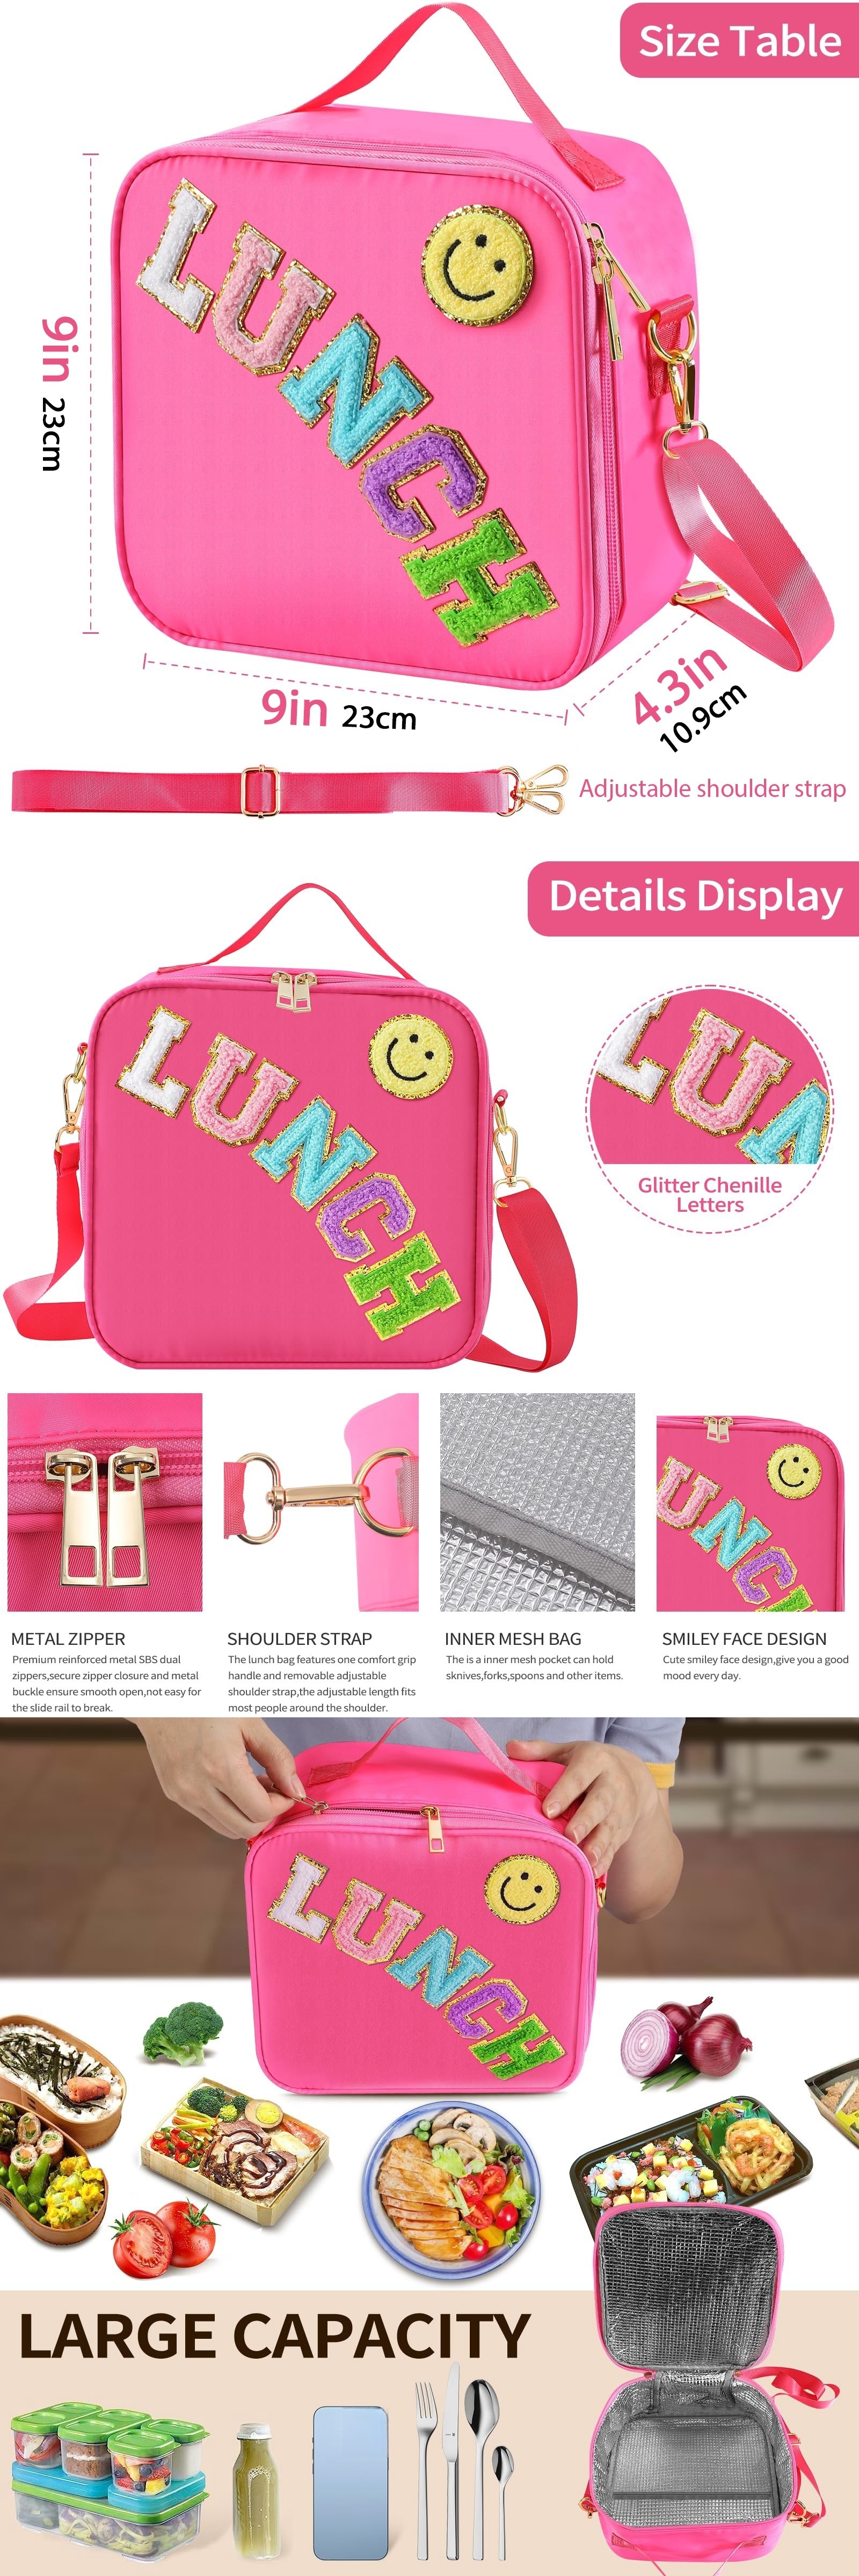 Insulated Lunch Bag With Adjustable Shoulder Strap, Nylon Preppy